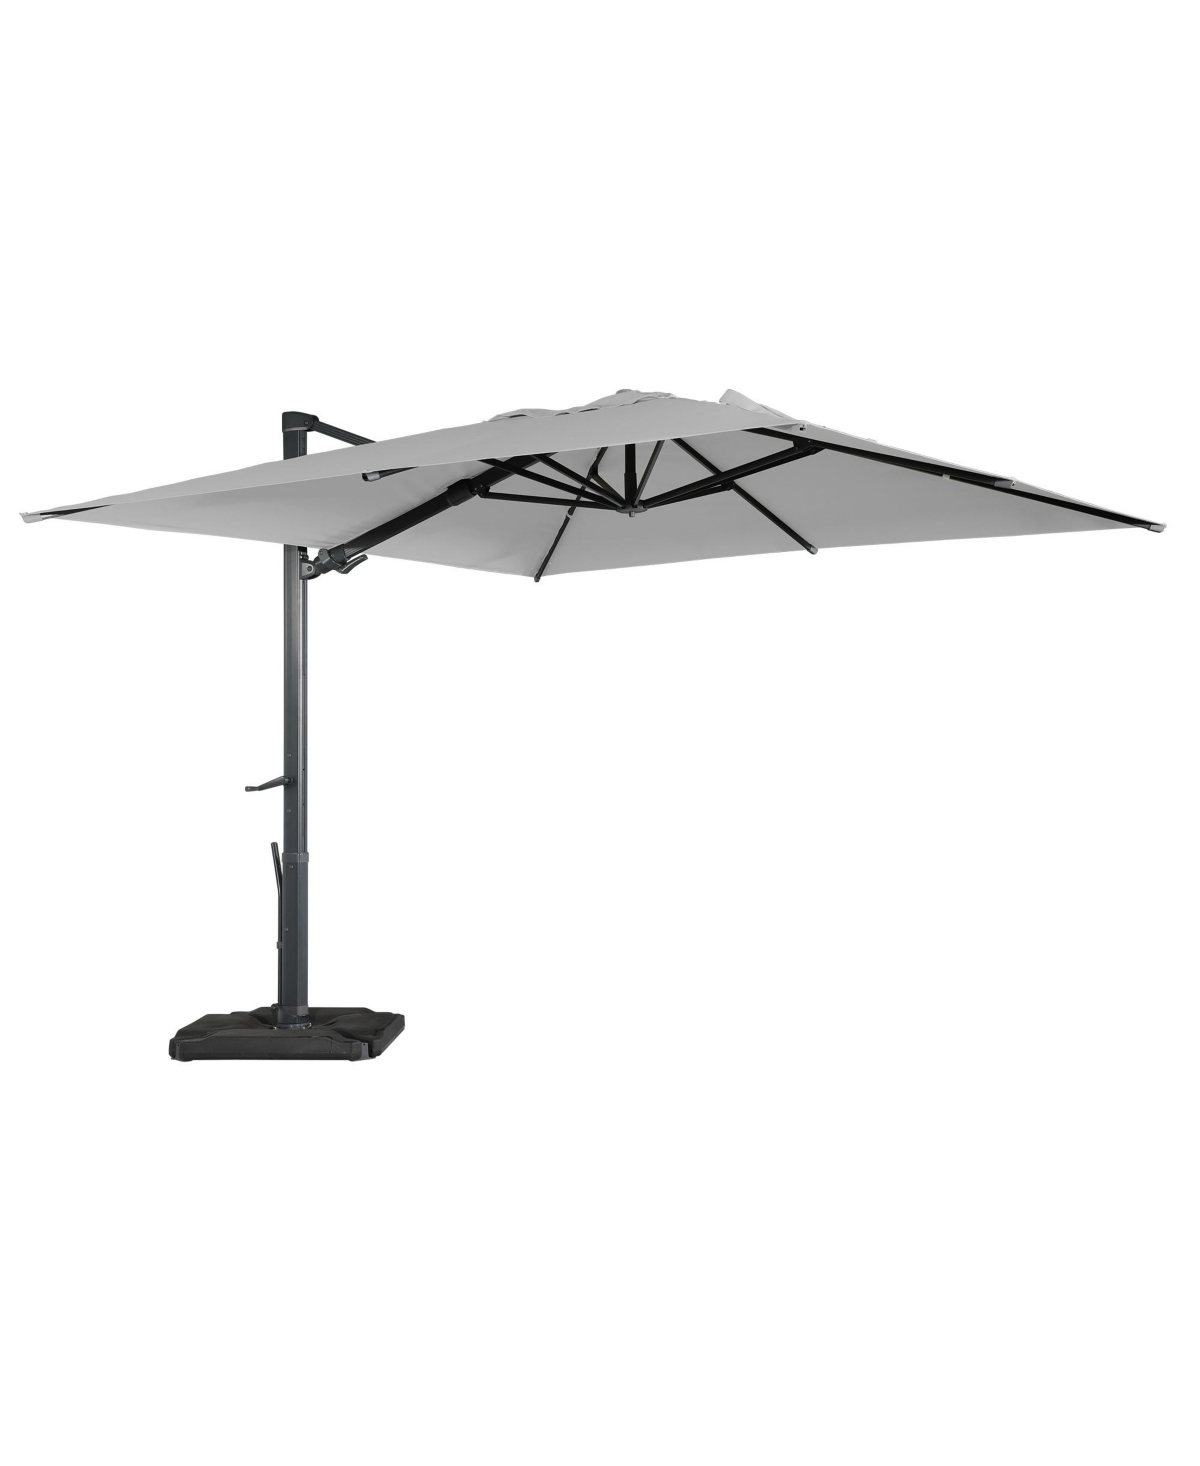 10ft Square Cantilever Patio Umbrella with Included Base Weight for Outdoor Sun Shade - Gray